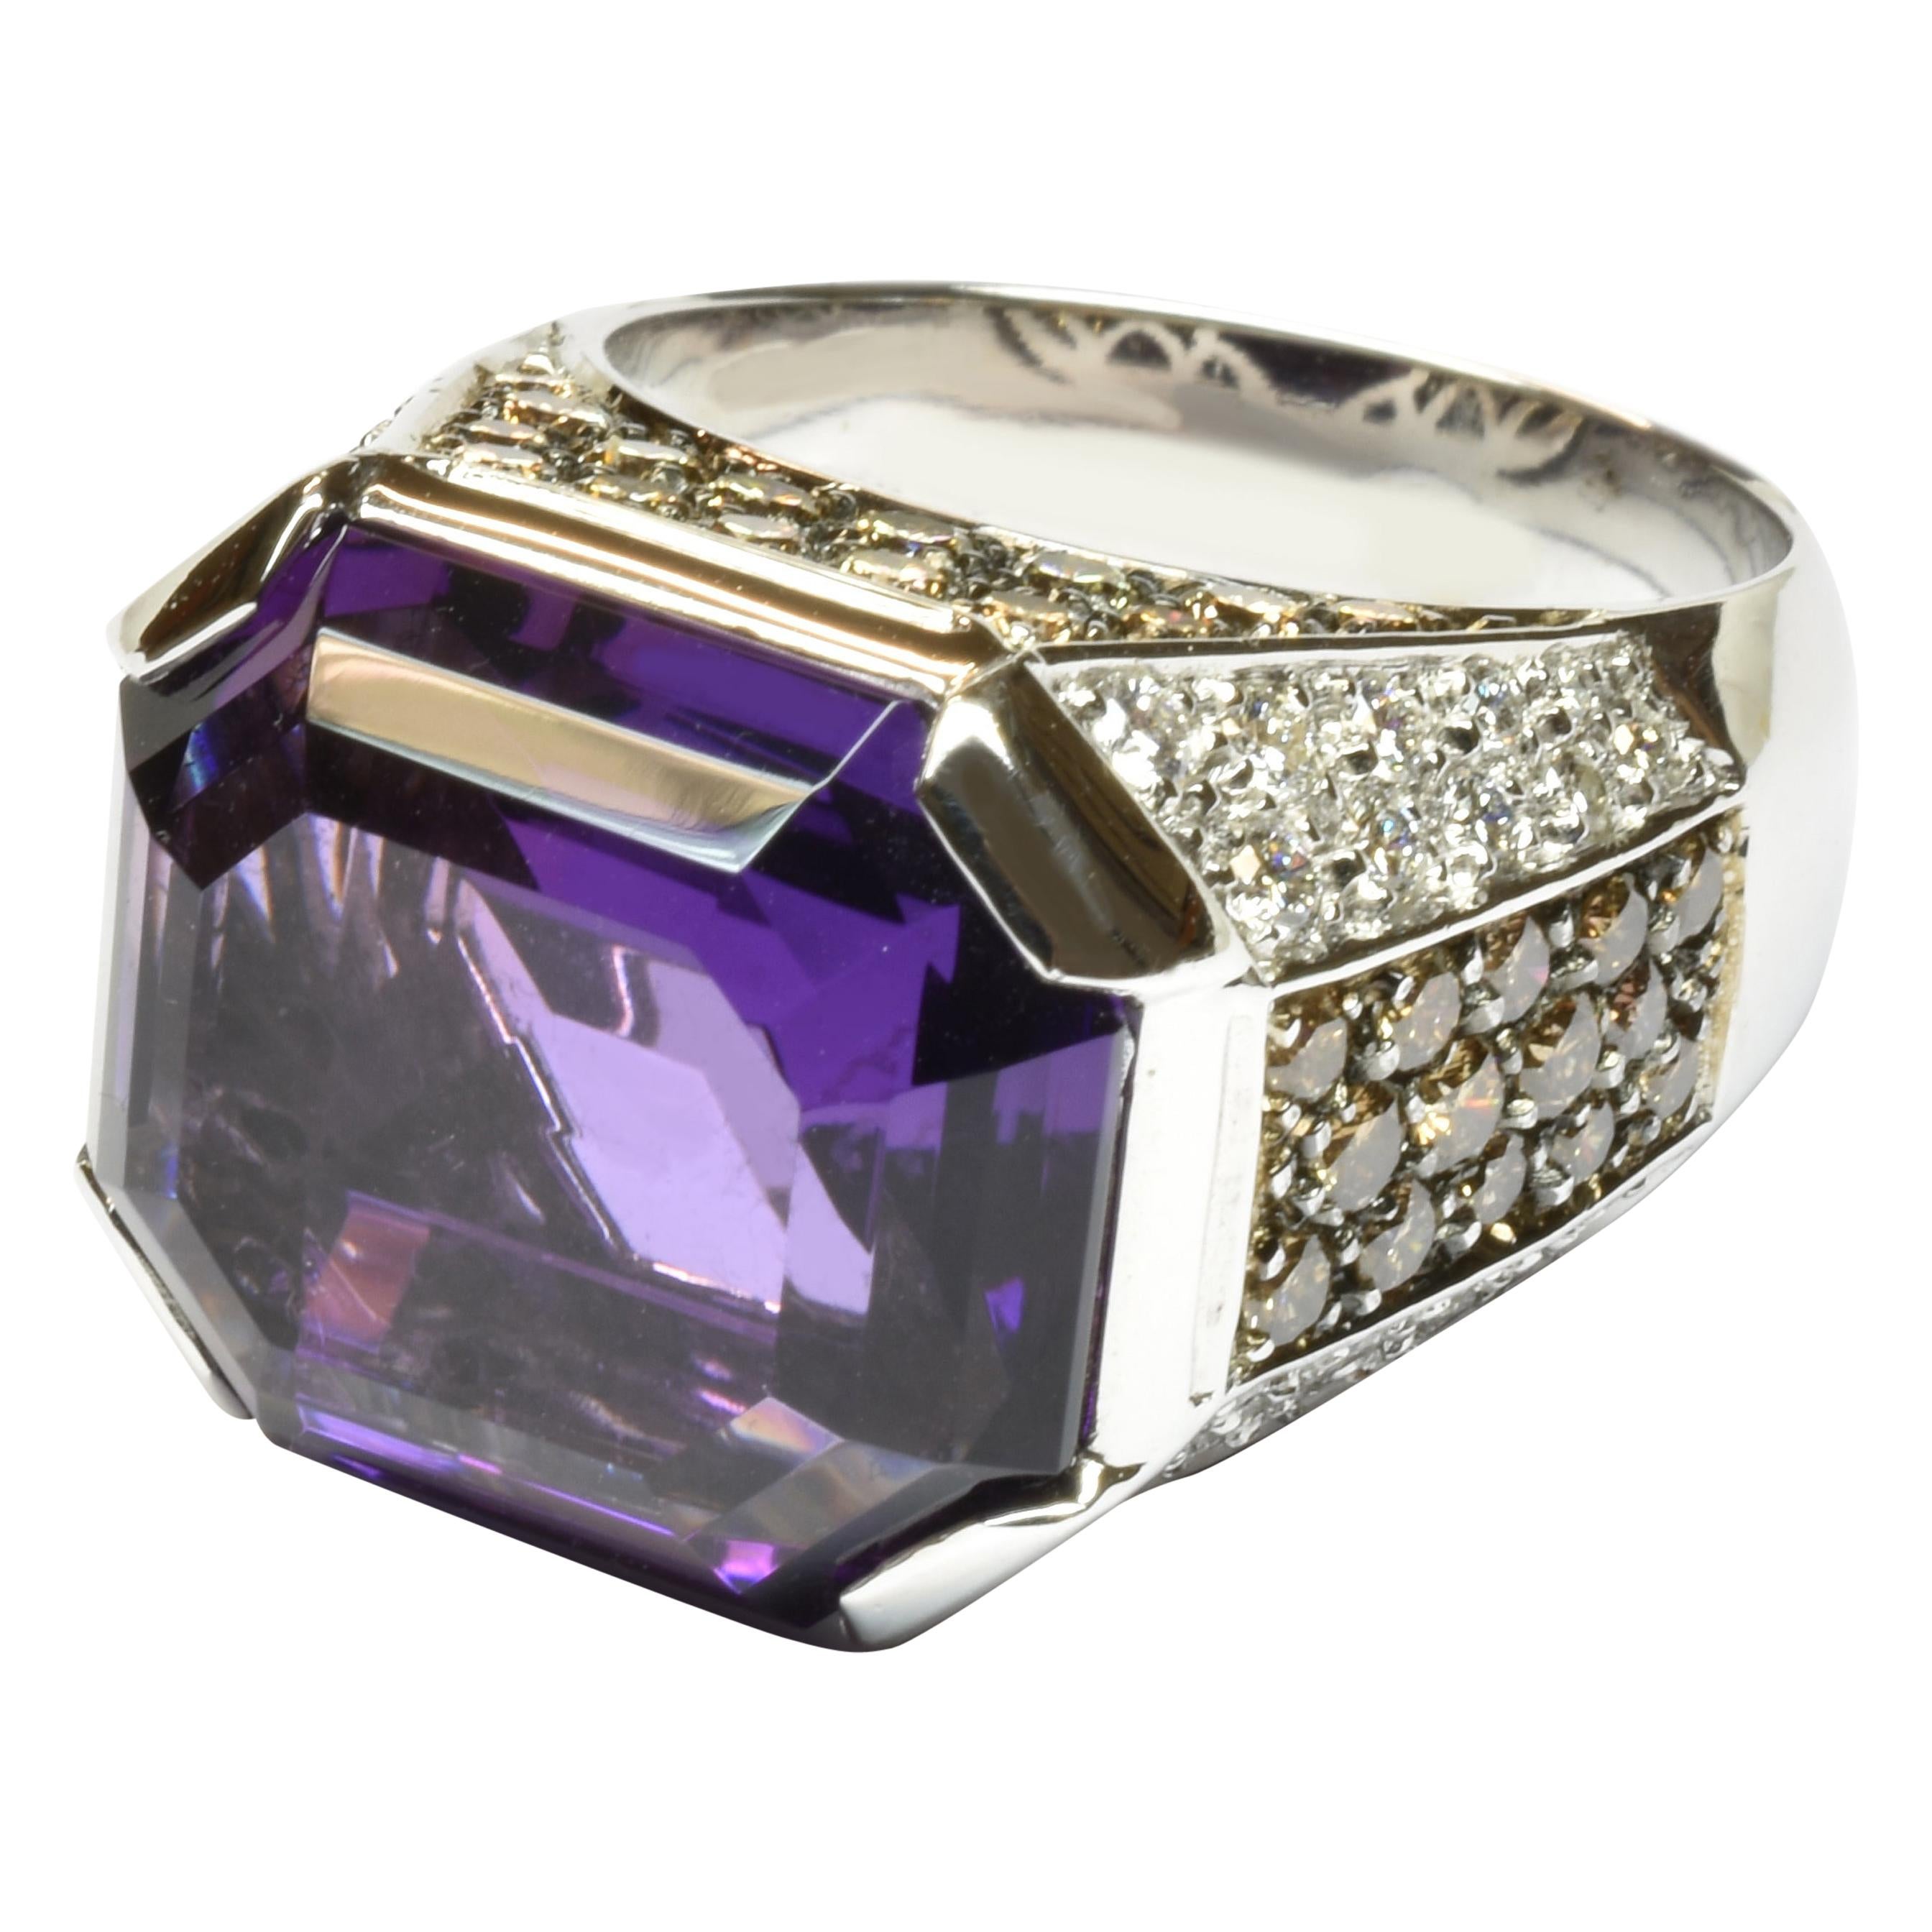 Octagonal Shaped Amethyst and Diamonds Gold Ring Made in Italy